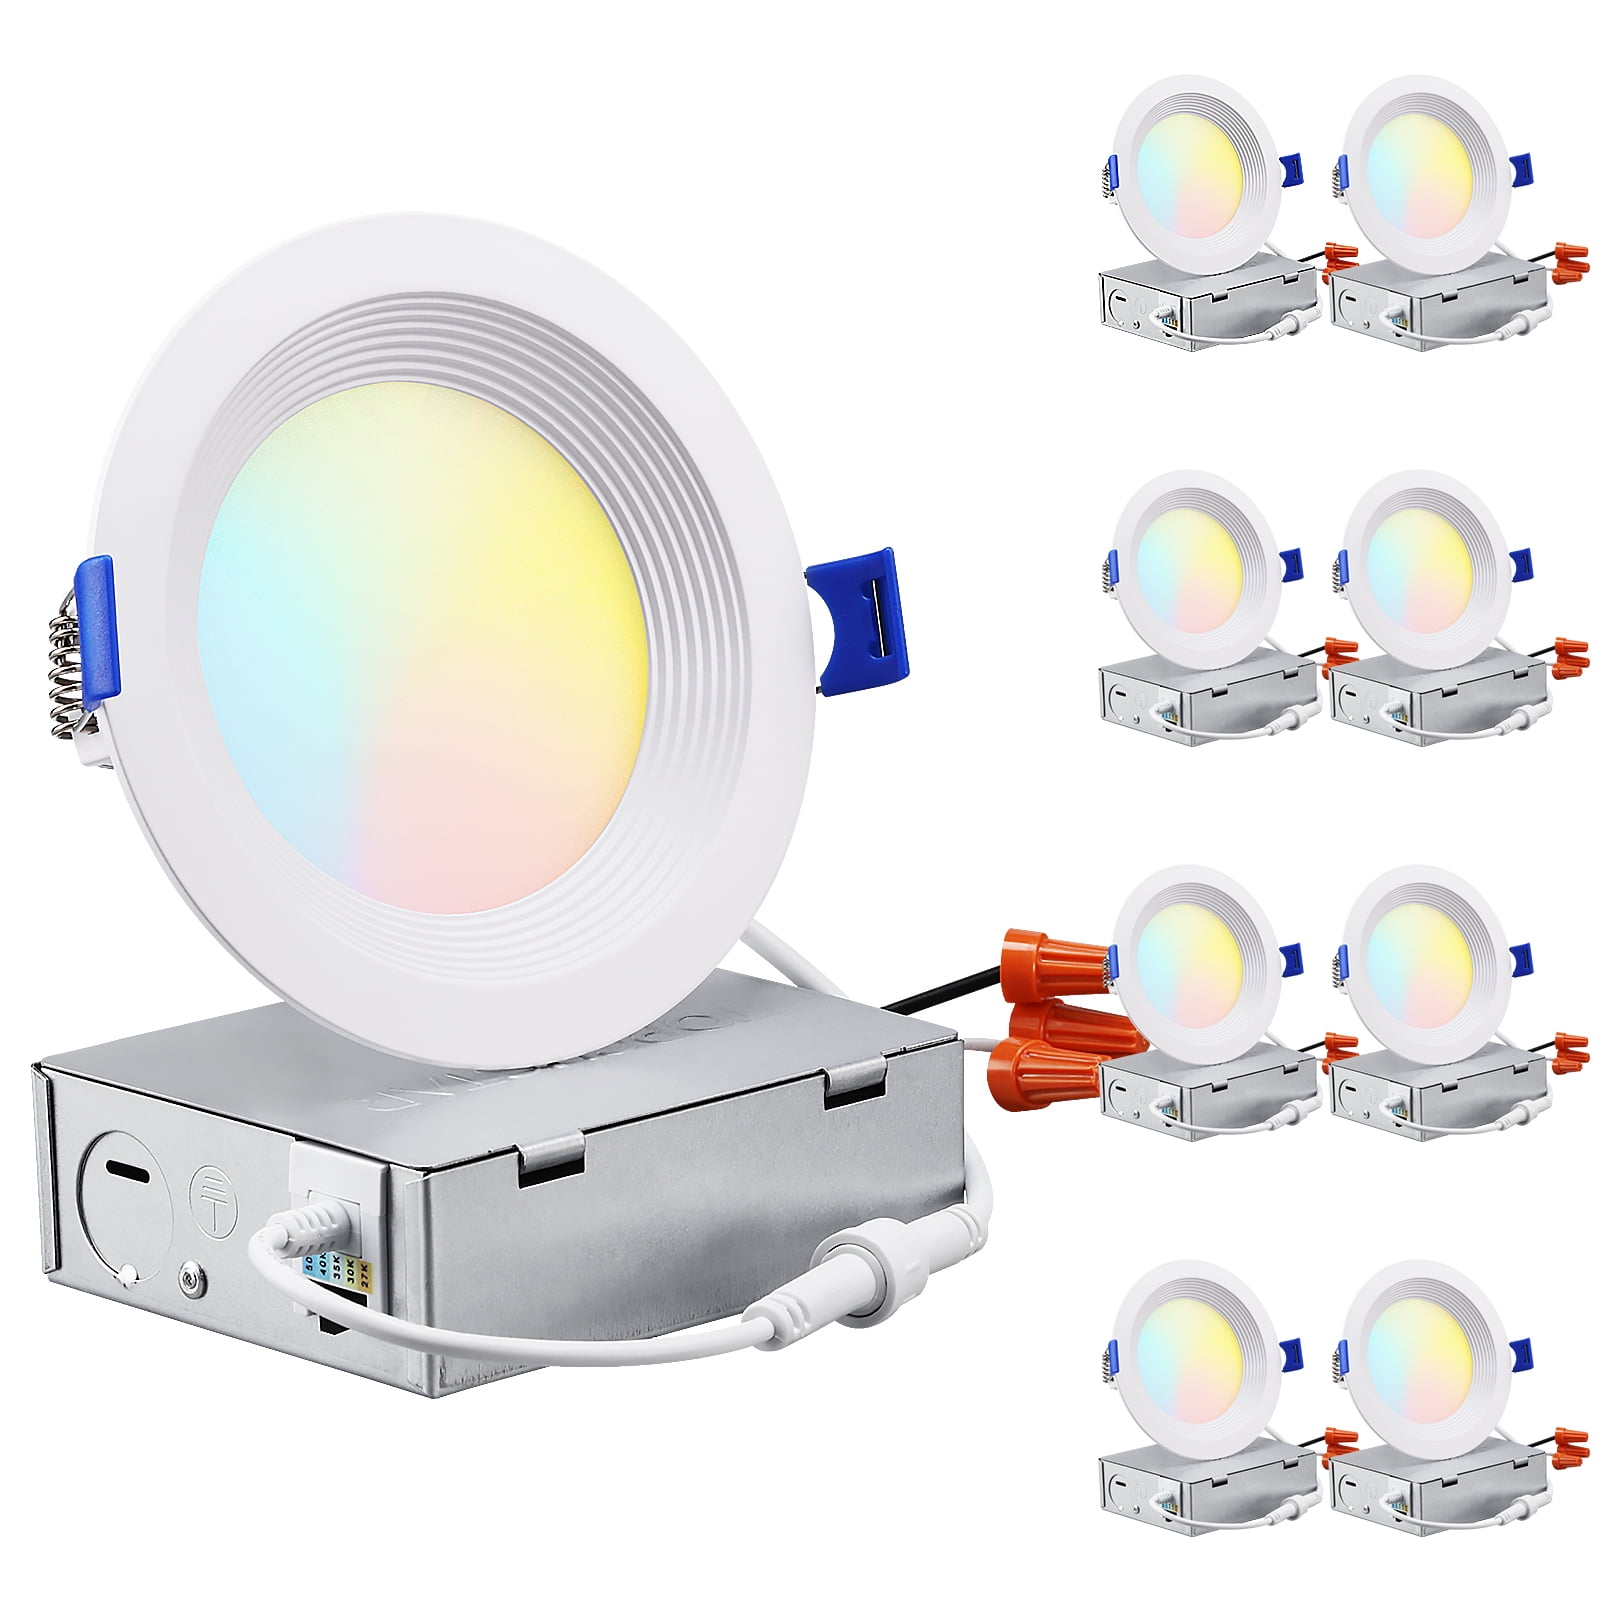 4 in. Ultra Thin LED Downlight, Slim Recessed Canless Light, IC Rated, 750  Lumens, 5 CCT, Dimmable, J-Box Included